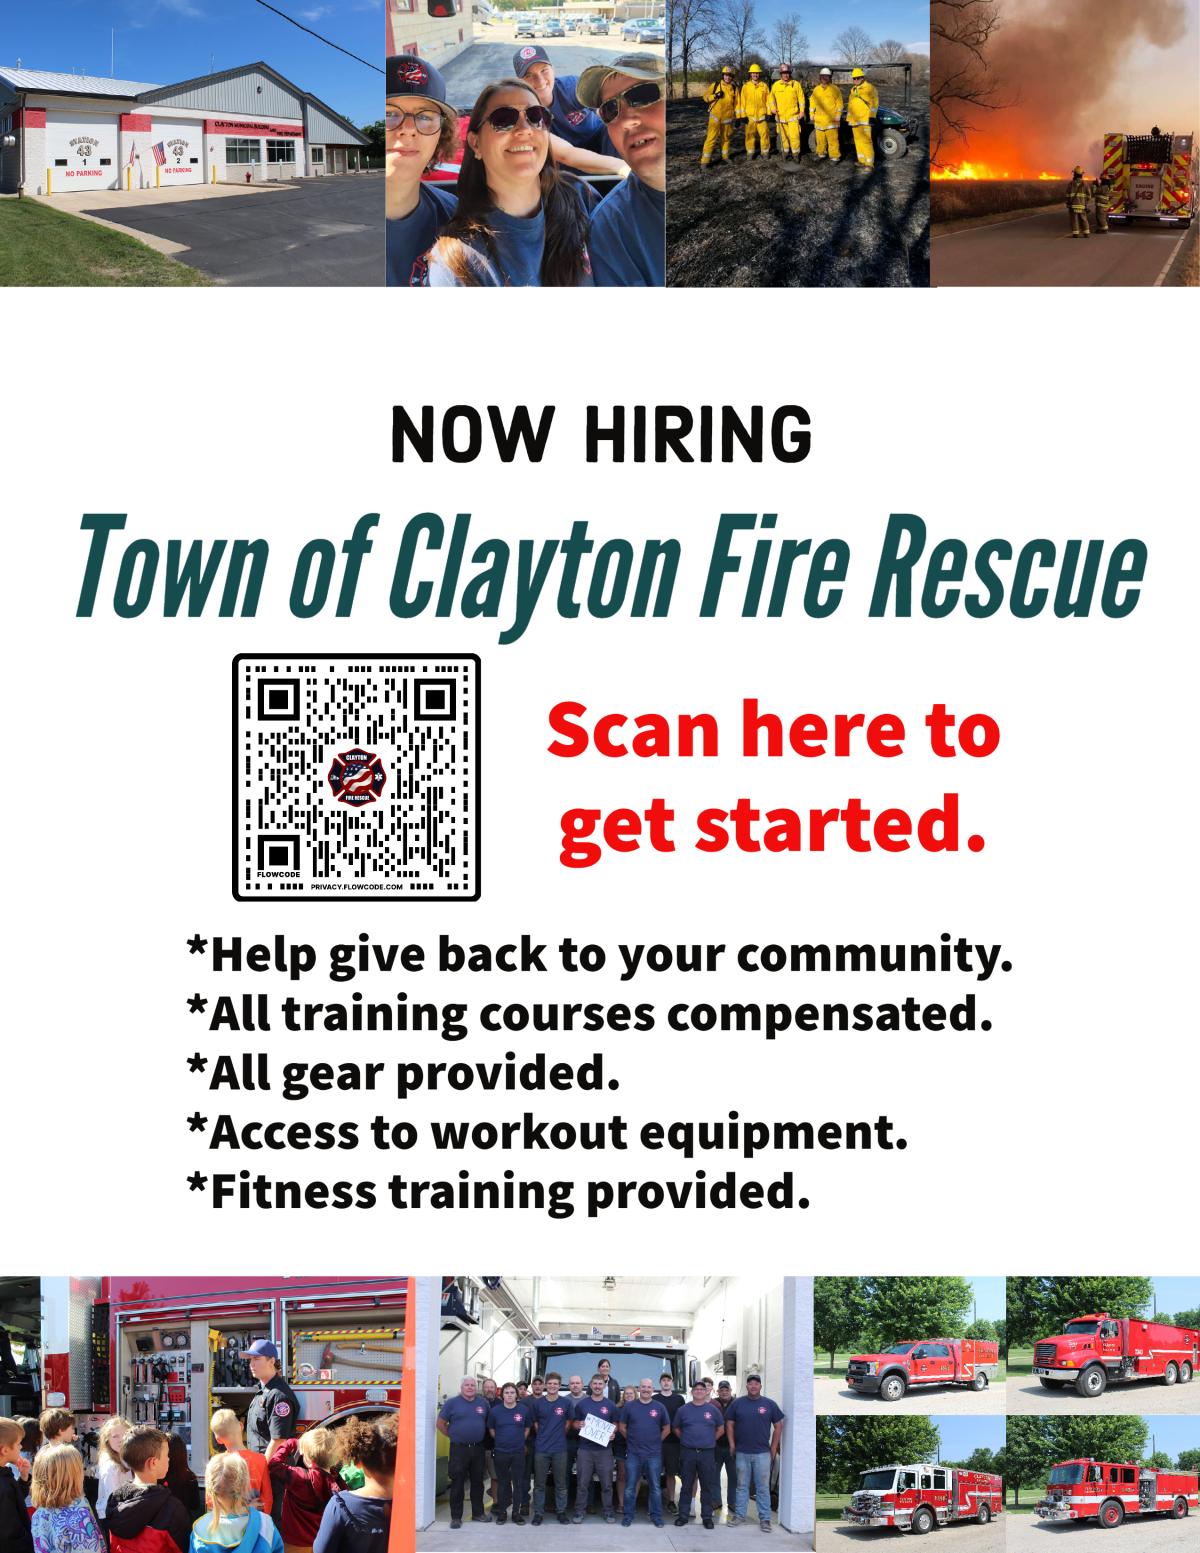 Now Hiring - Town of Clayton Fire Rescue flyer